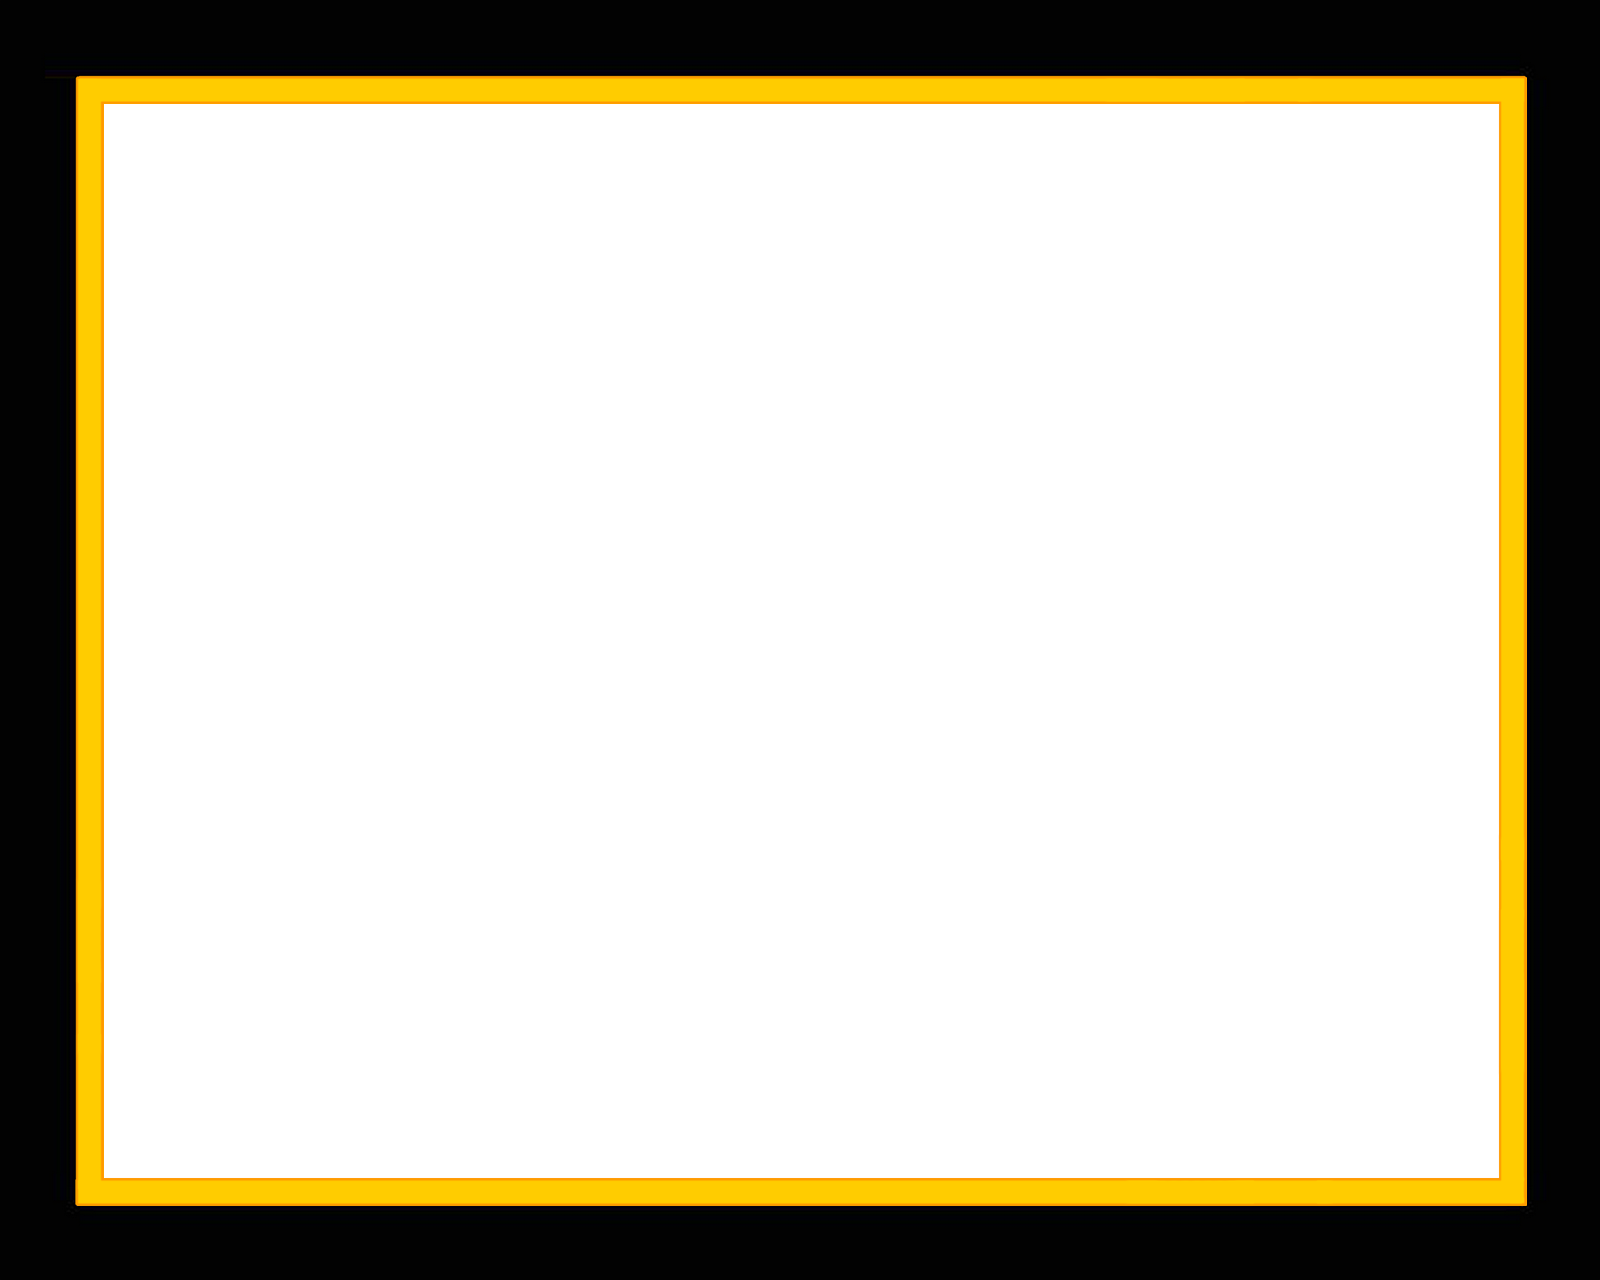 Black frame png. Border with darker yellow